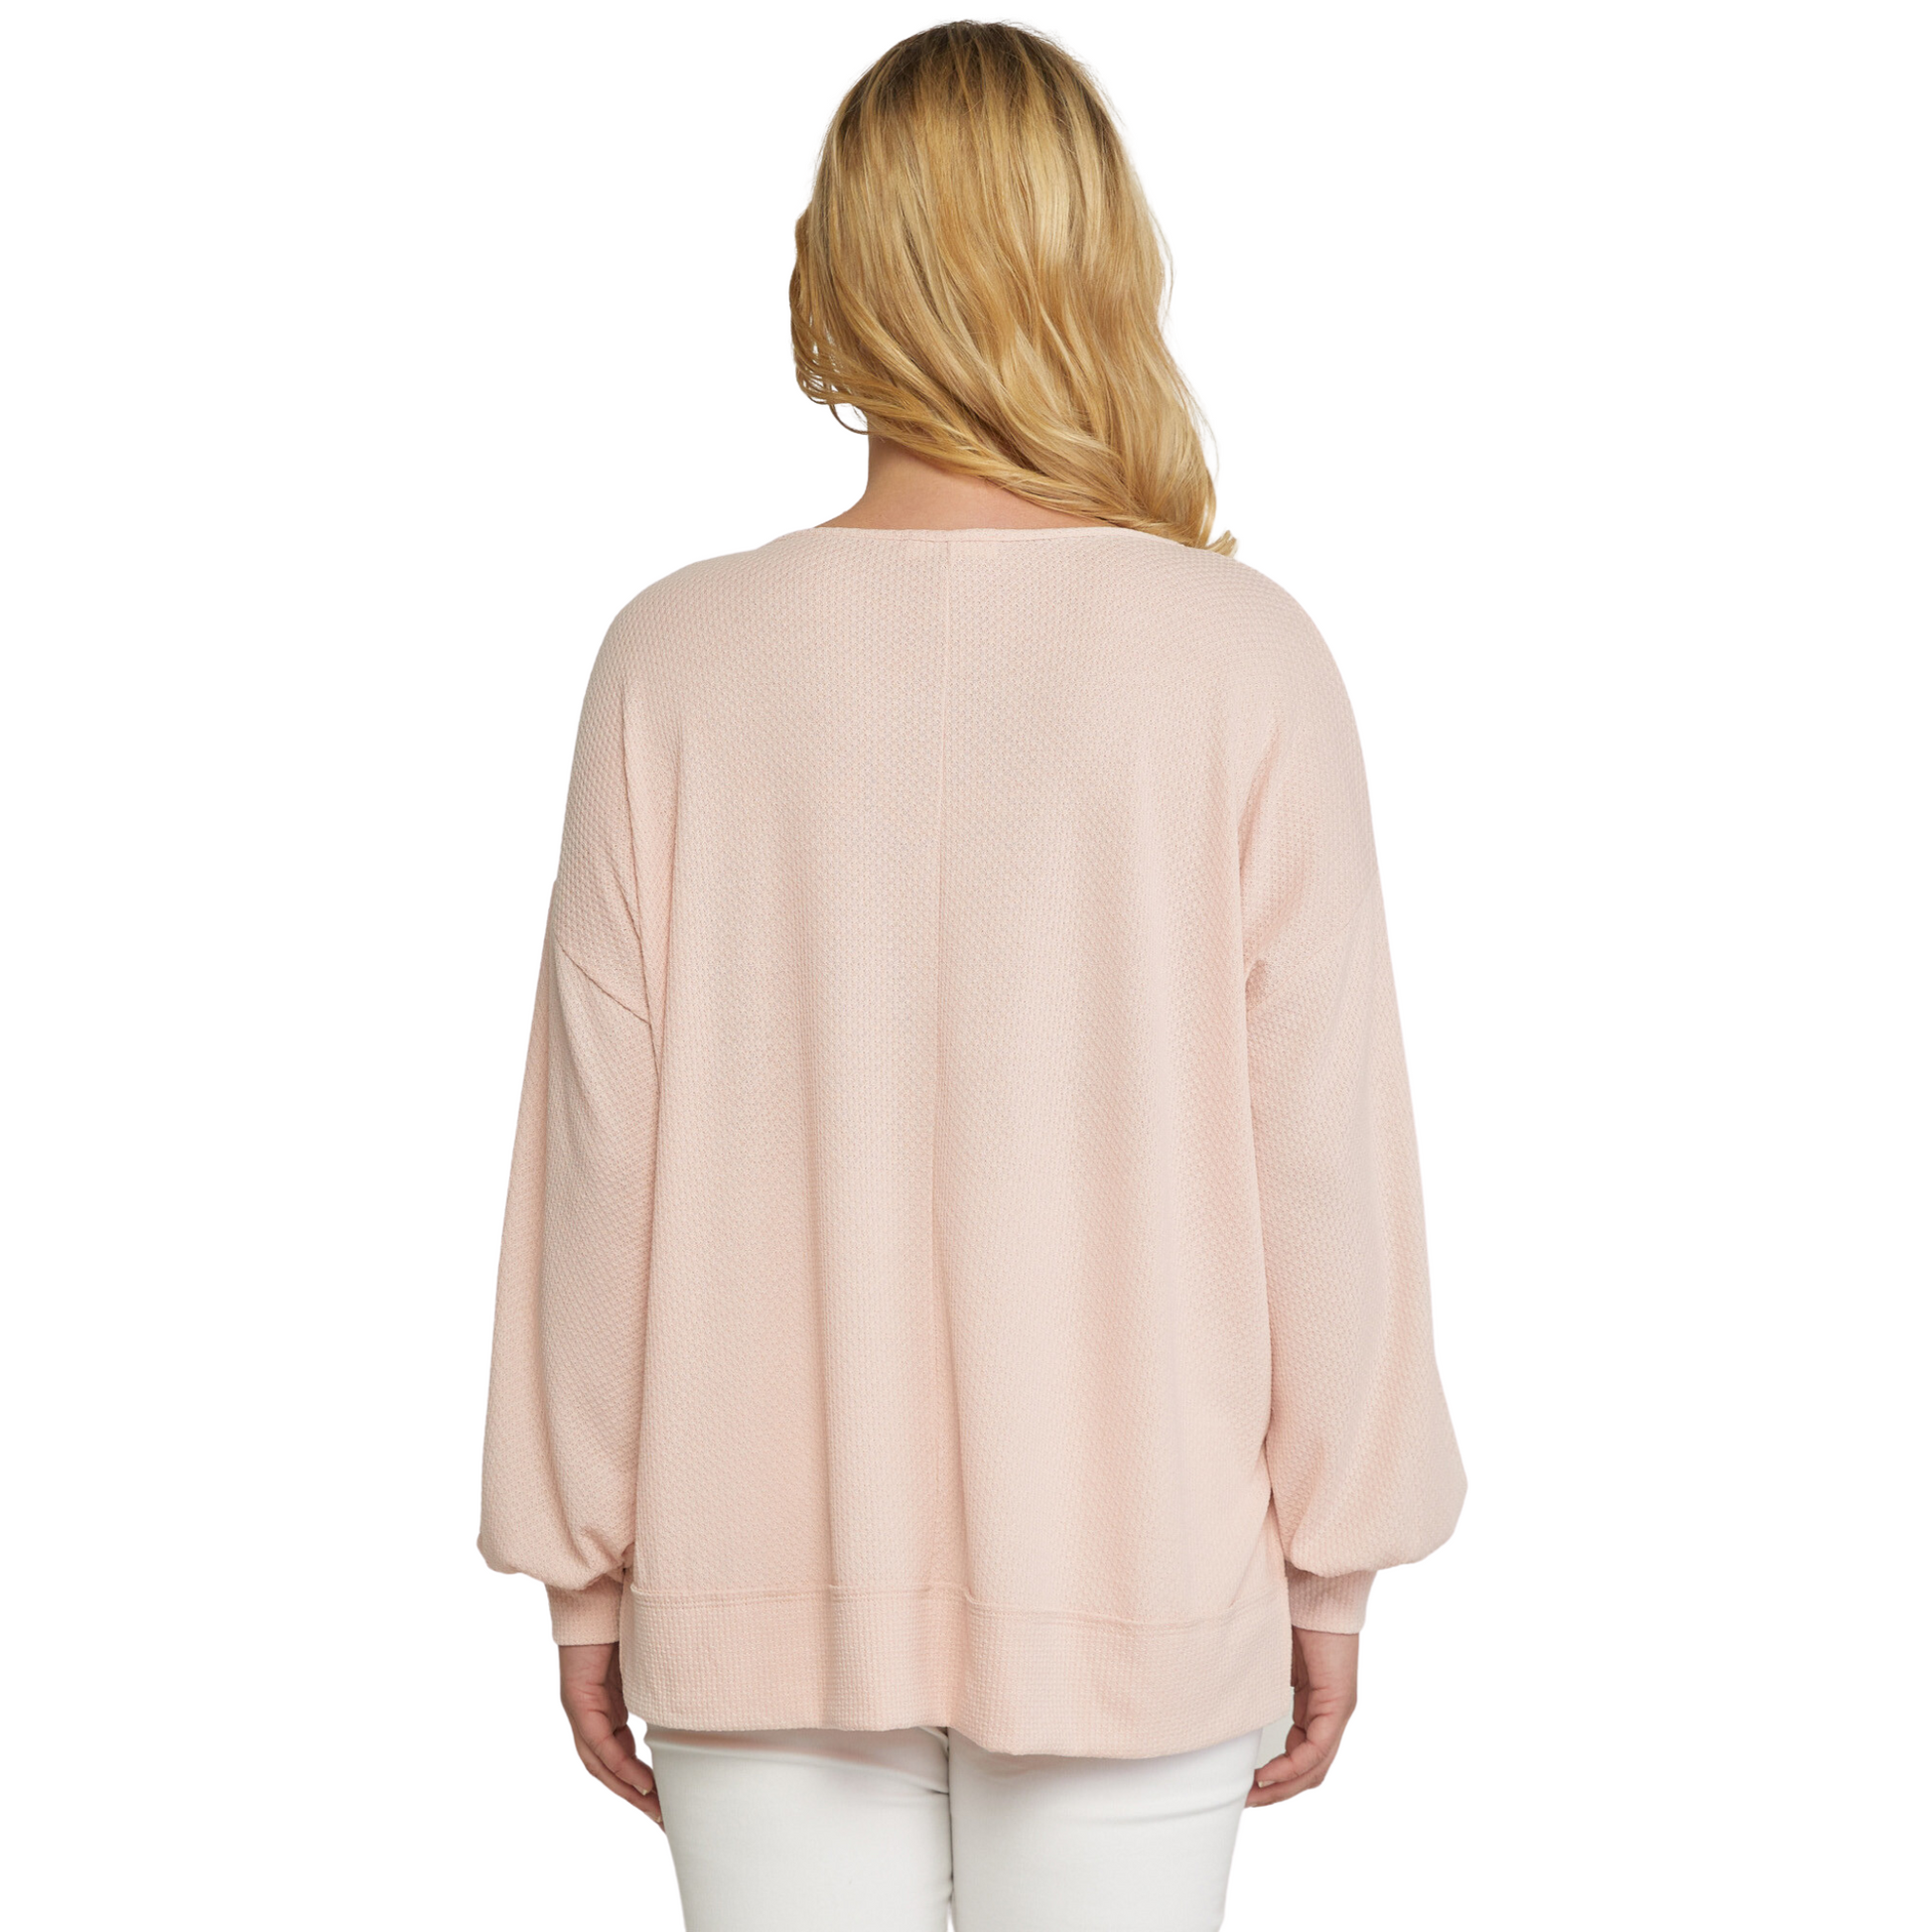 This attractive soft pink Cuffed Sleeve Thermal Top is perfect for chilly days. Crafted from soft and cozy materials, it features a flattering v neck collar and cuffed sleeves for added comfort. Keep warm and stylish in this must-have top.